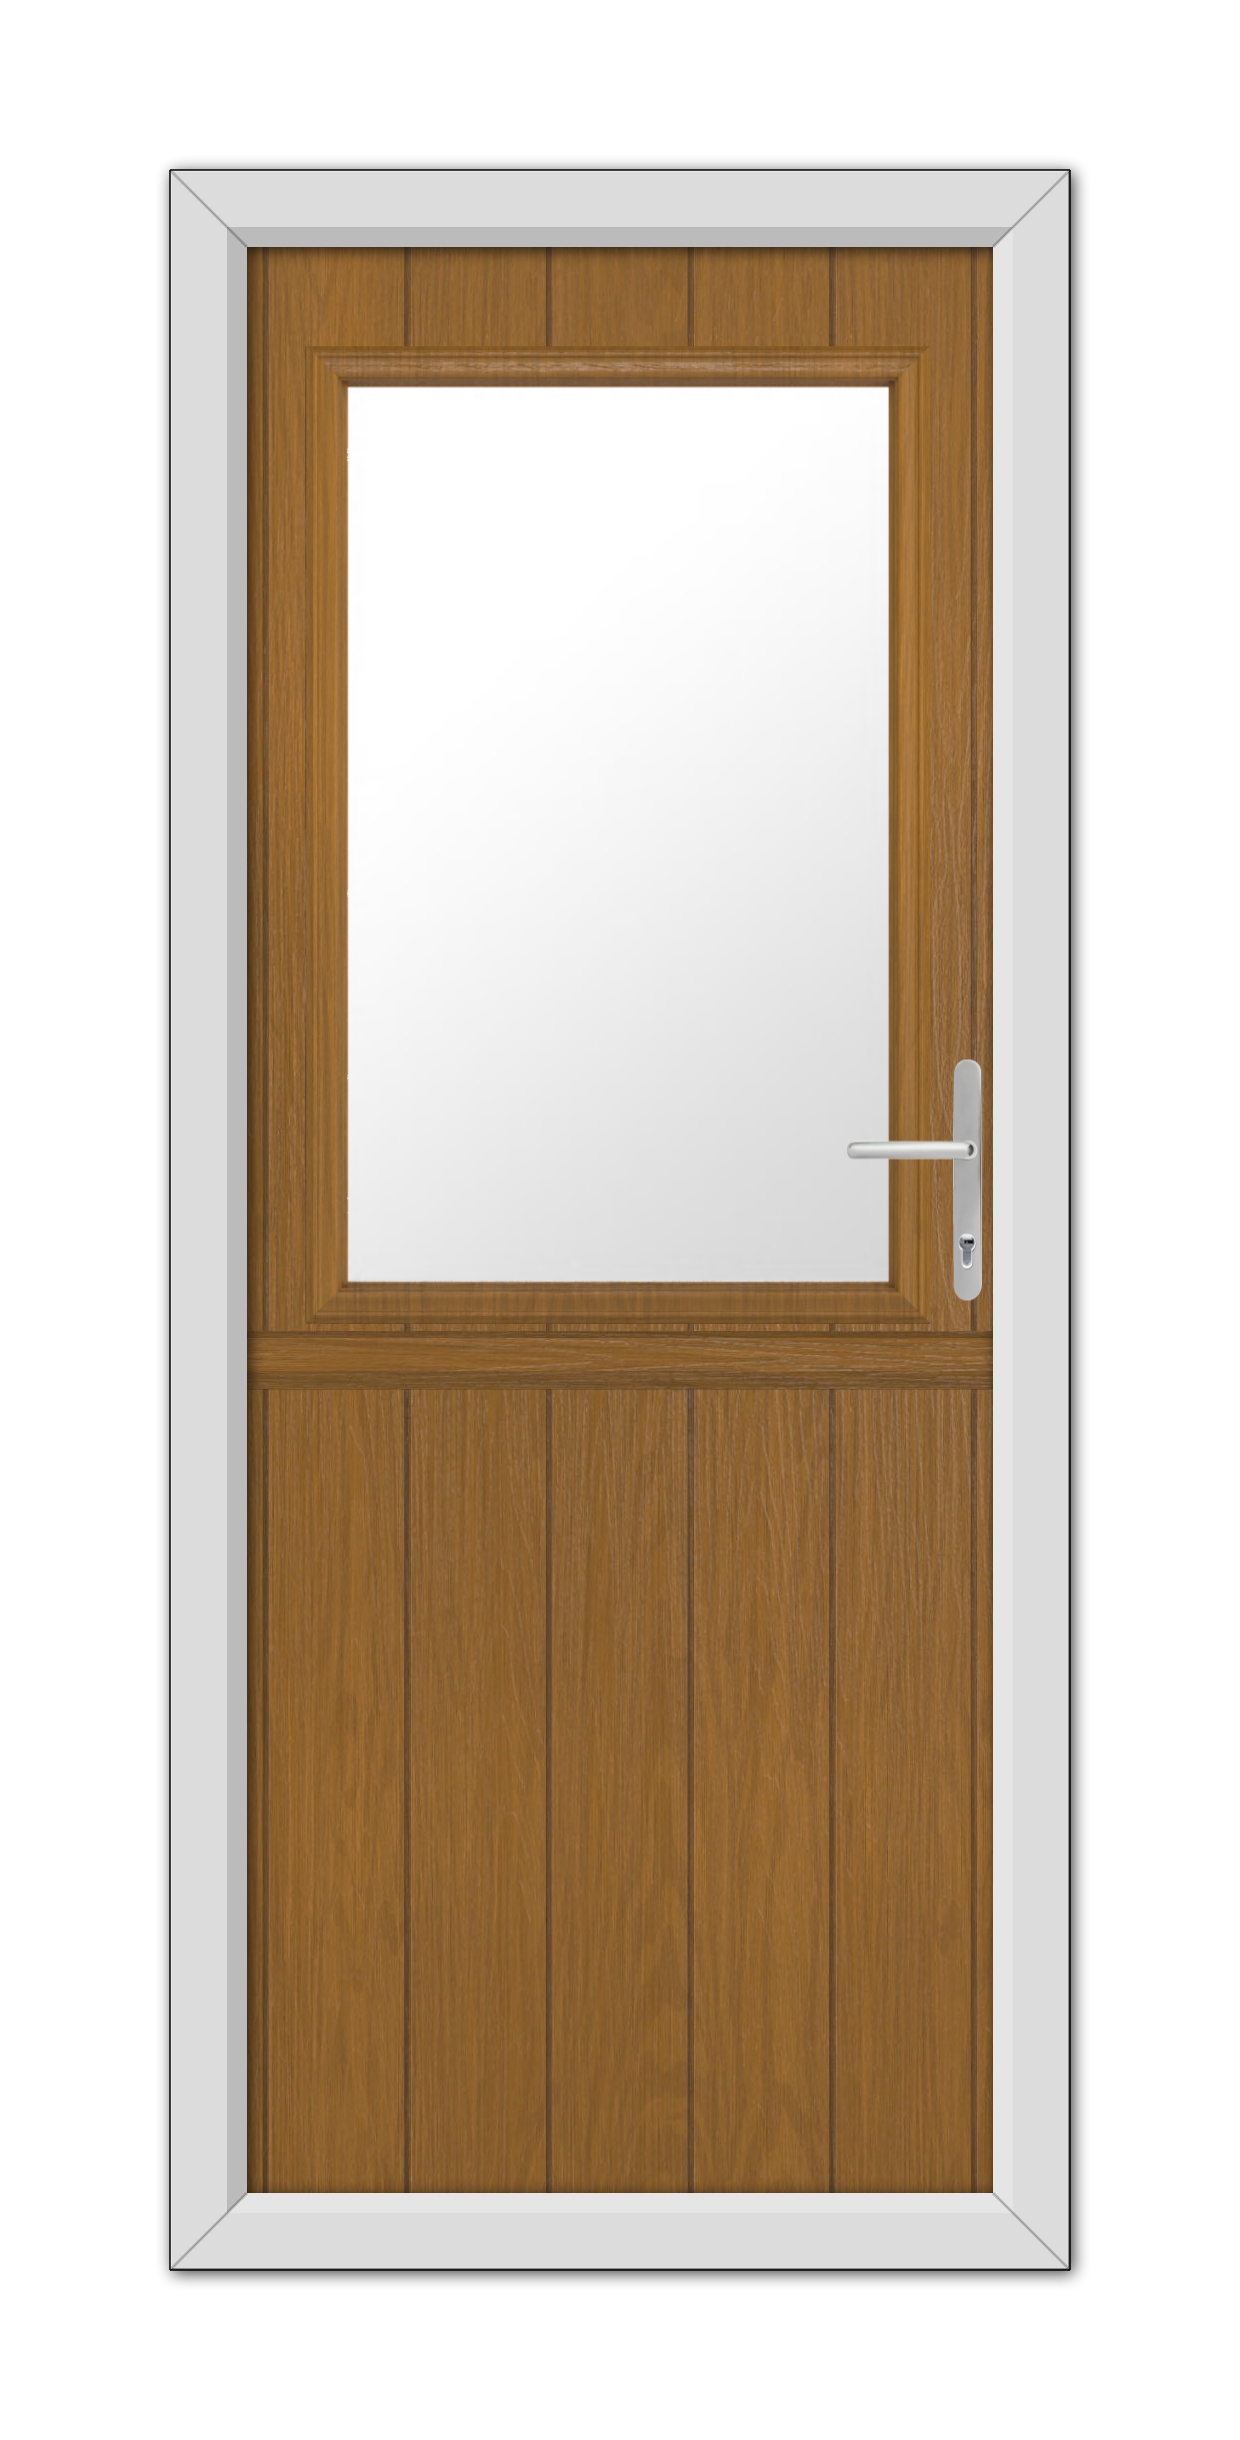 A modern Oak Clifton Stable Composite Door 48mm Timber Core with a square glass window at the top and a metal handle on the right, set within a white frame.